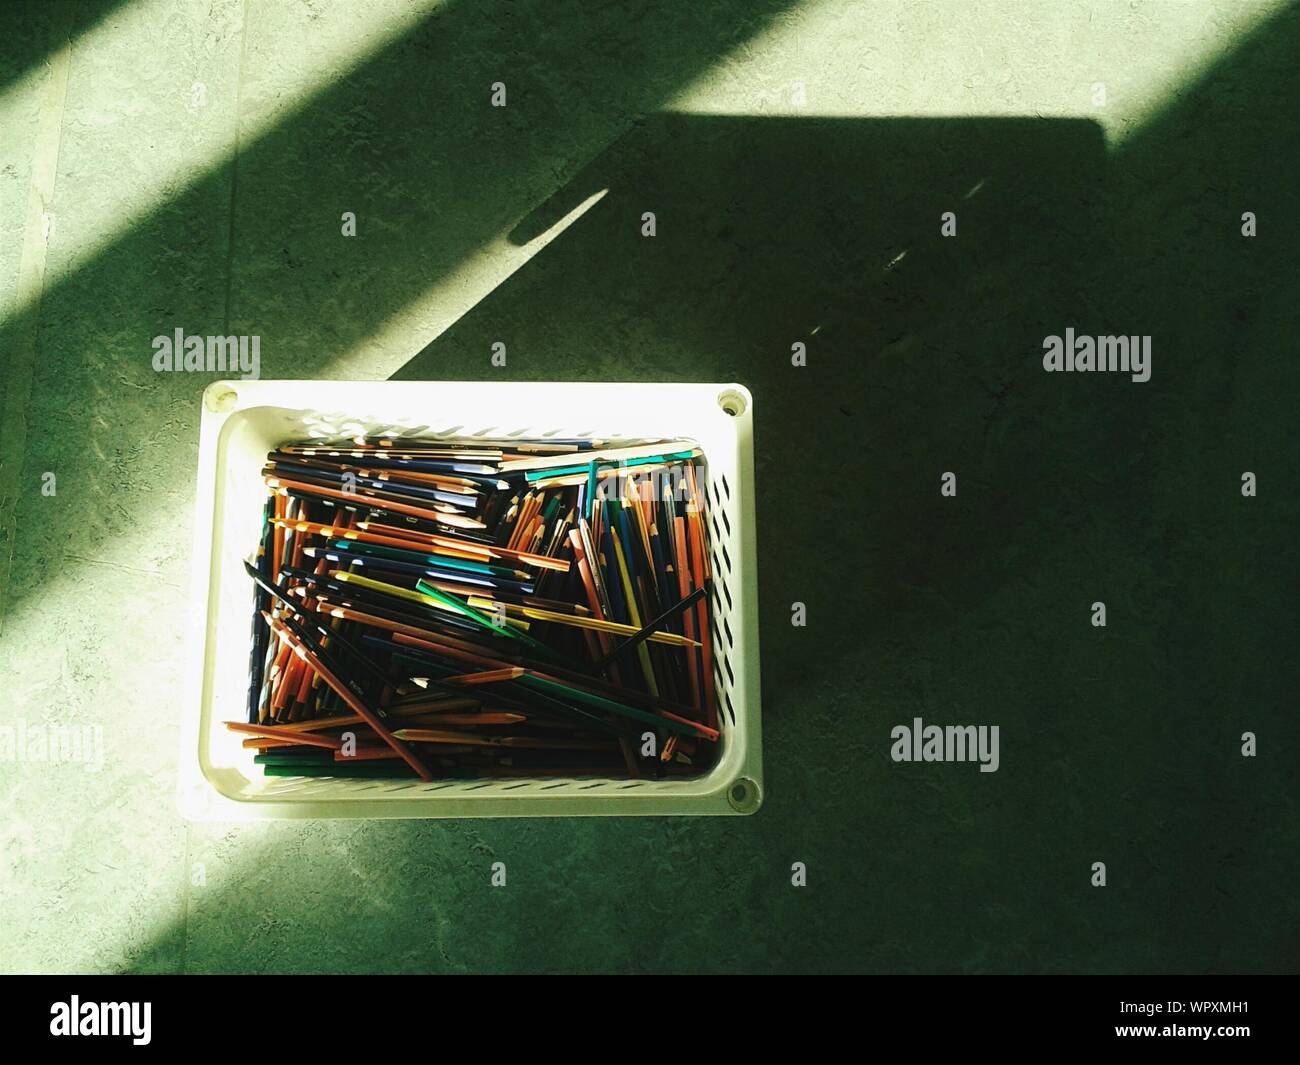 High Angle View Of Pencils In Container On Table Stock Photo